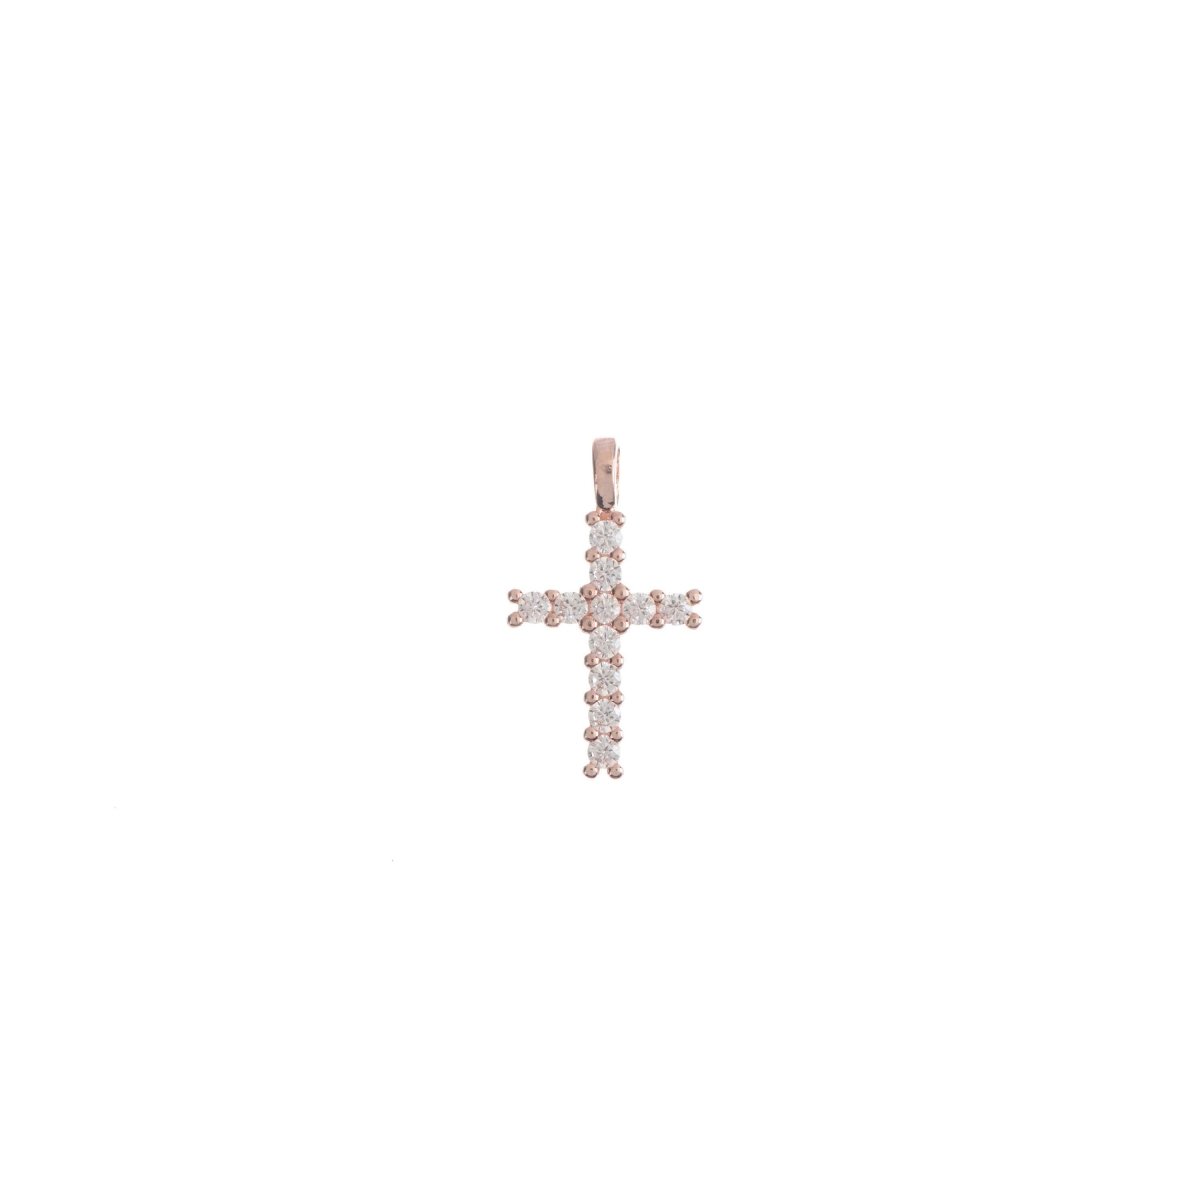 Dainty 14K White Gold Fill Cross CZ Cubic Zircon Pendant Charm 23mmx14mm for necklace Religious Jewelry Making, CL-C244 - DLUXCA